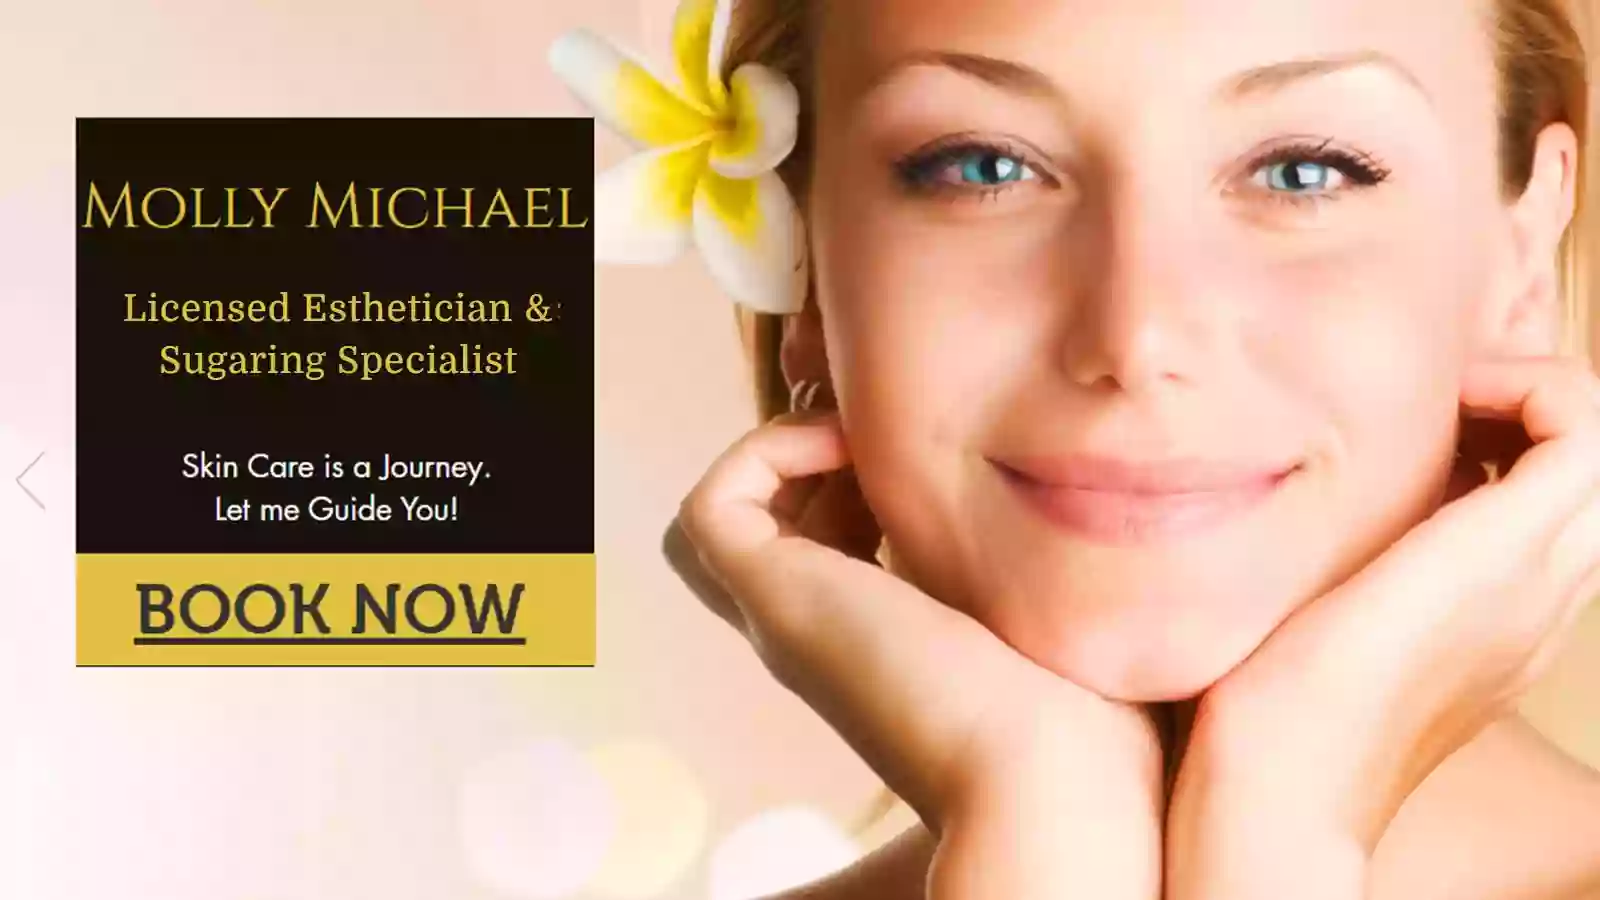 Molly Michael Licensed Esthetician and Sugaring Specialist